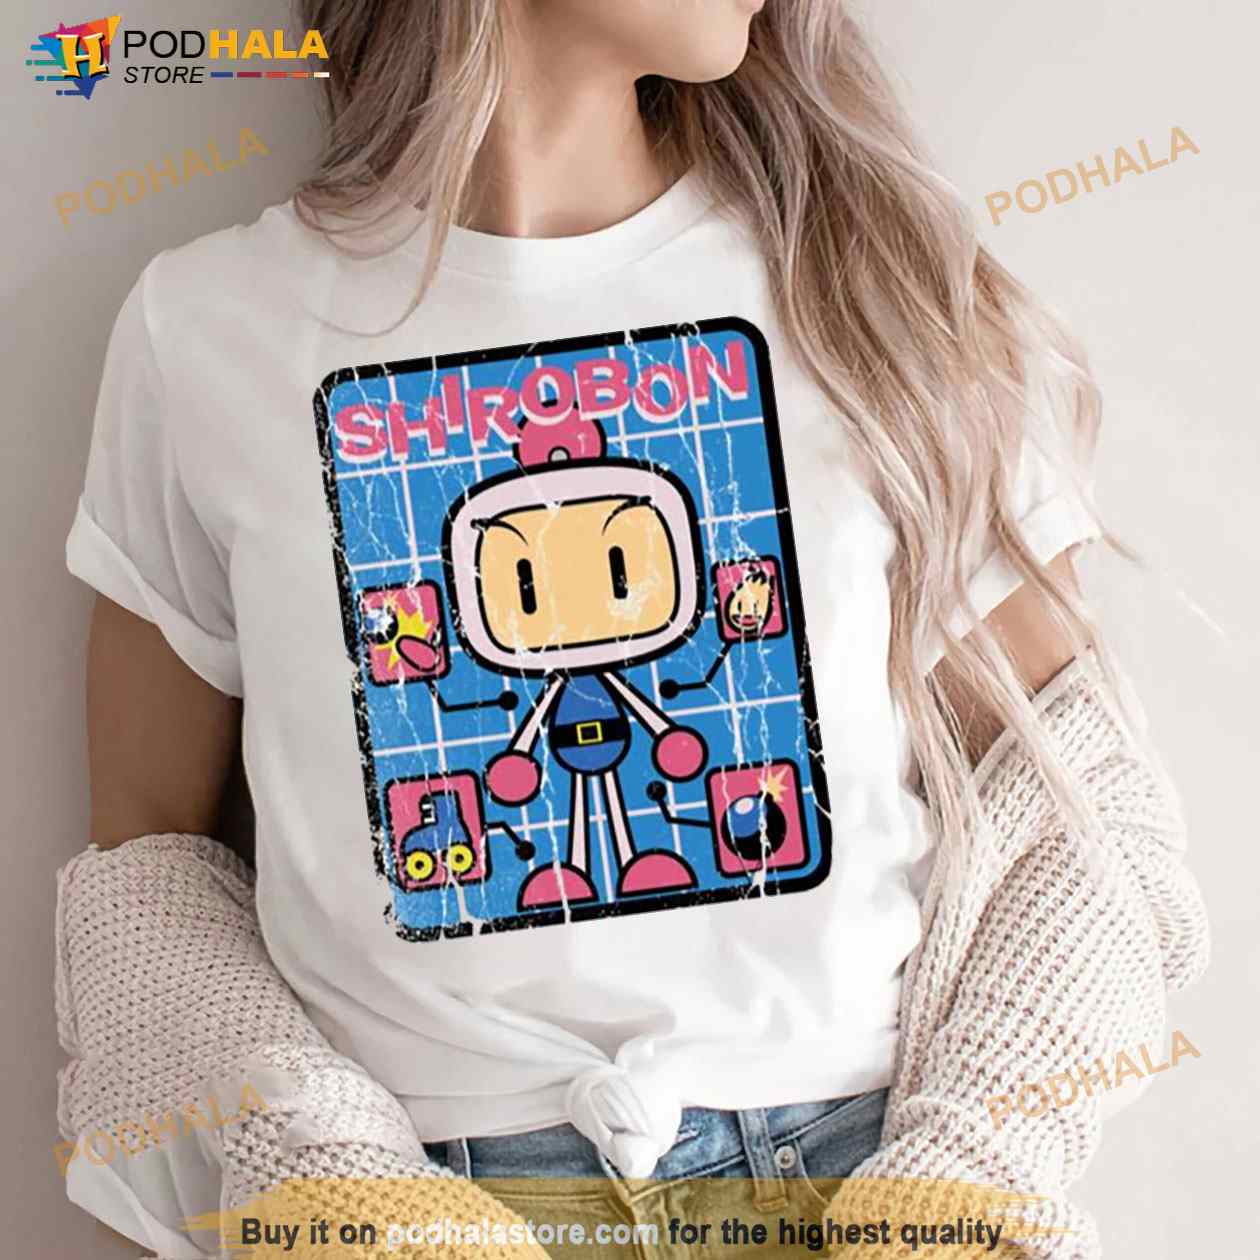 Electrify specielt efterklang Shirobon Bomberman Shirt - Bring Your Ideas, Thoughts And Imaginations Into  Reality Today